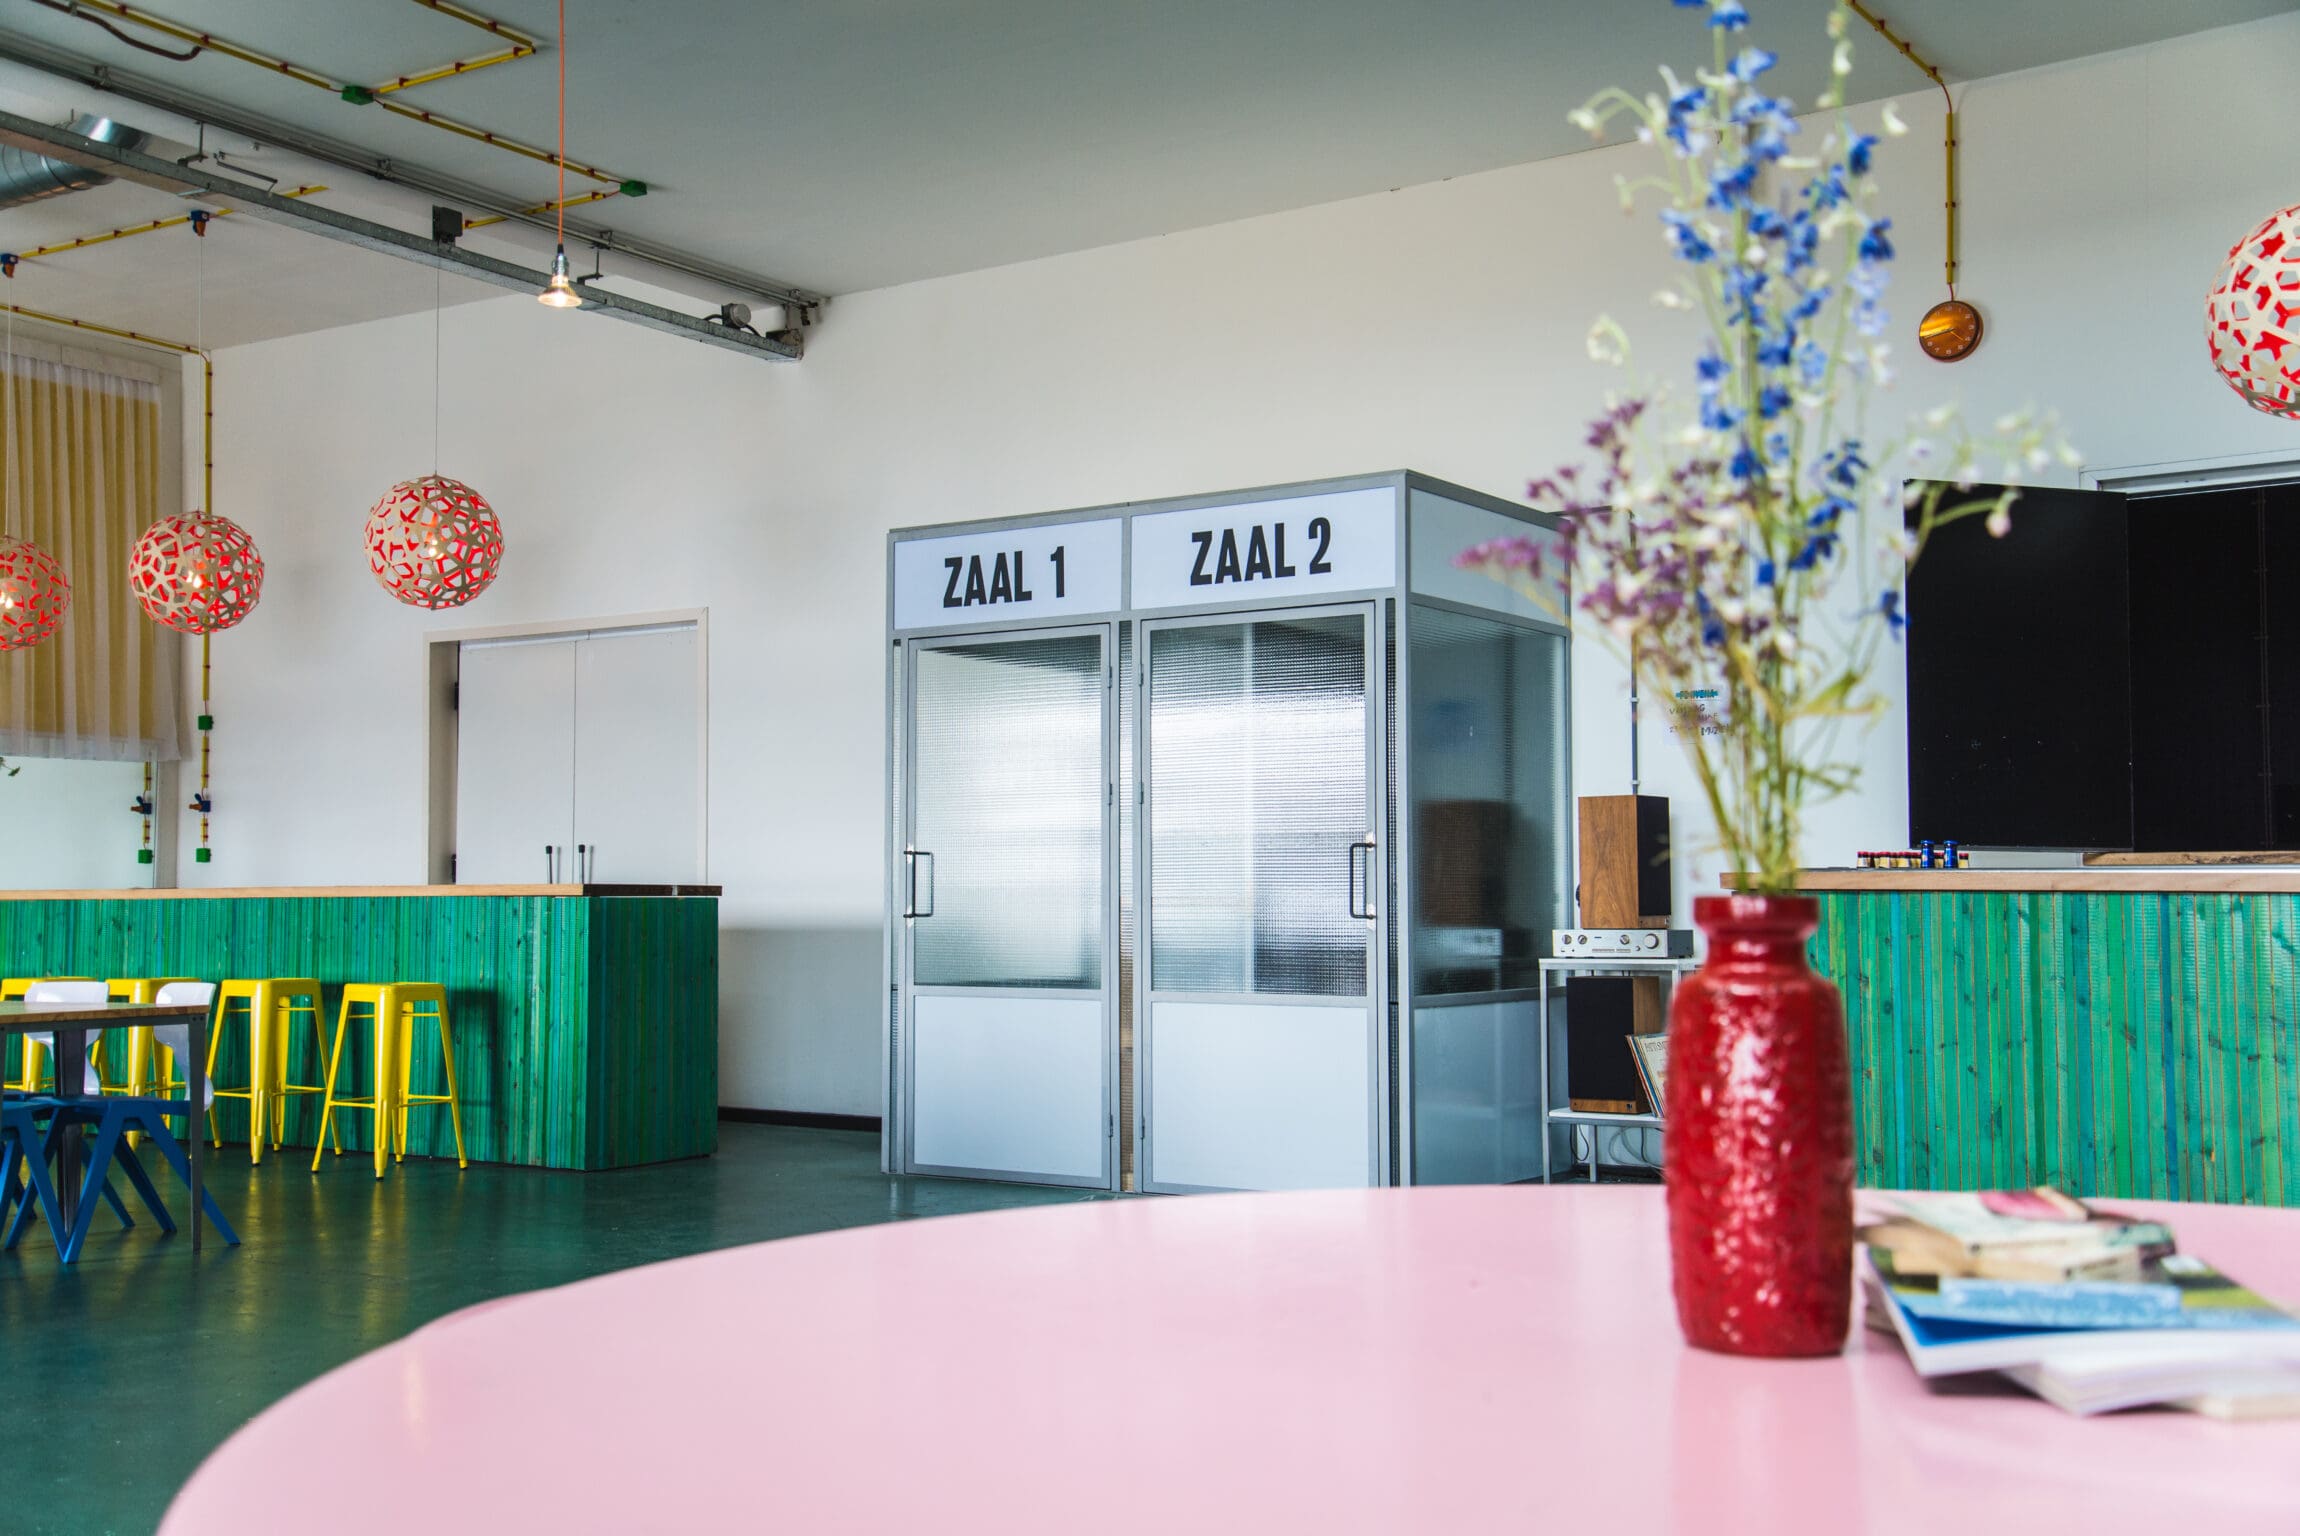 The best restaurants in Amsterdam | A circular pink table with a red vase and flowers sits in the foreground in front of a green bar.